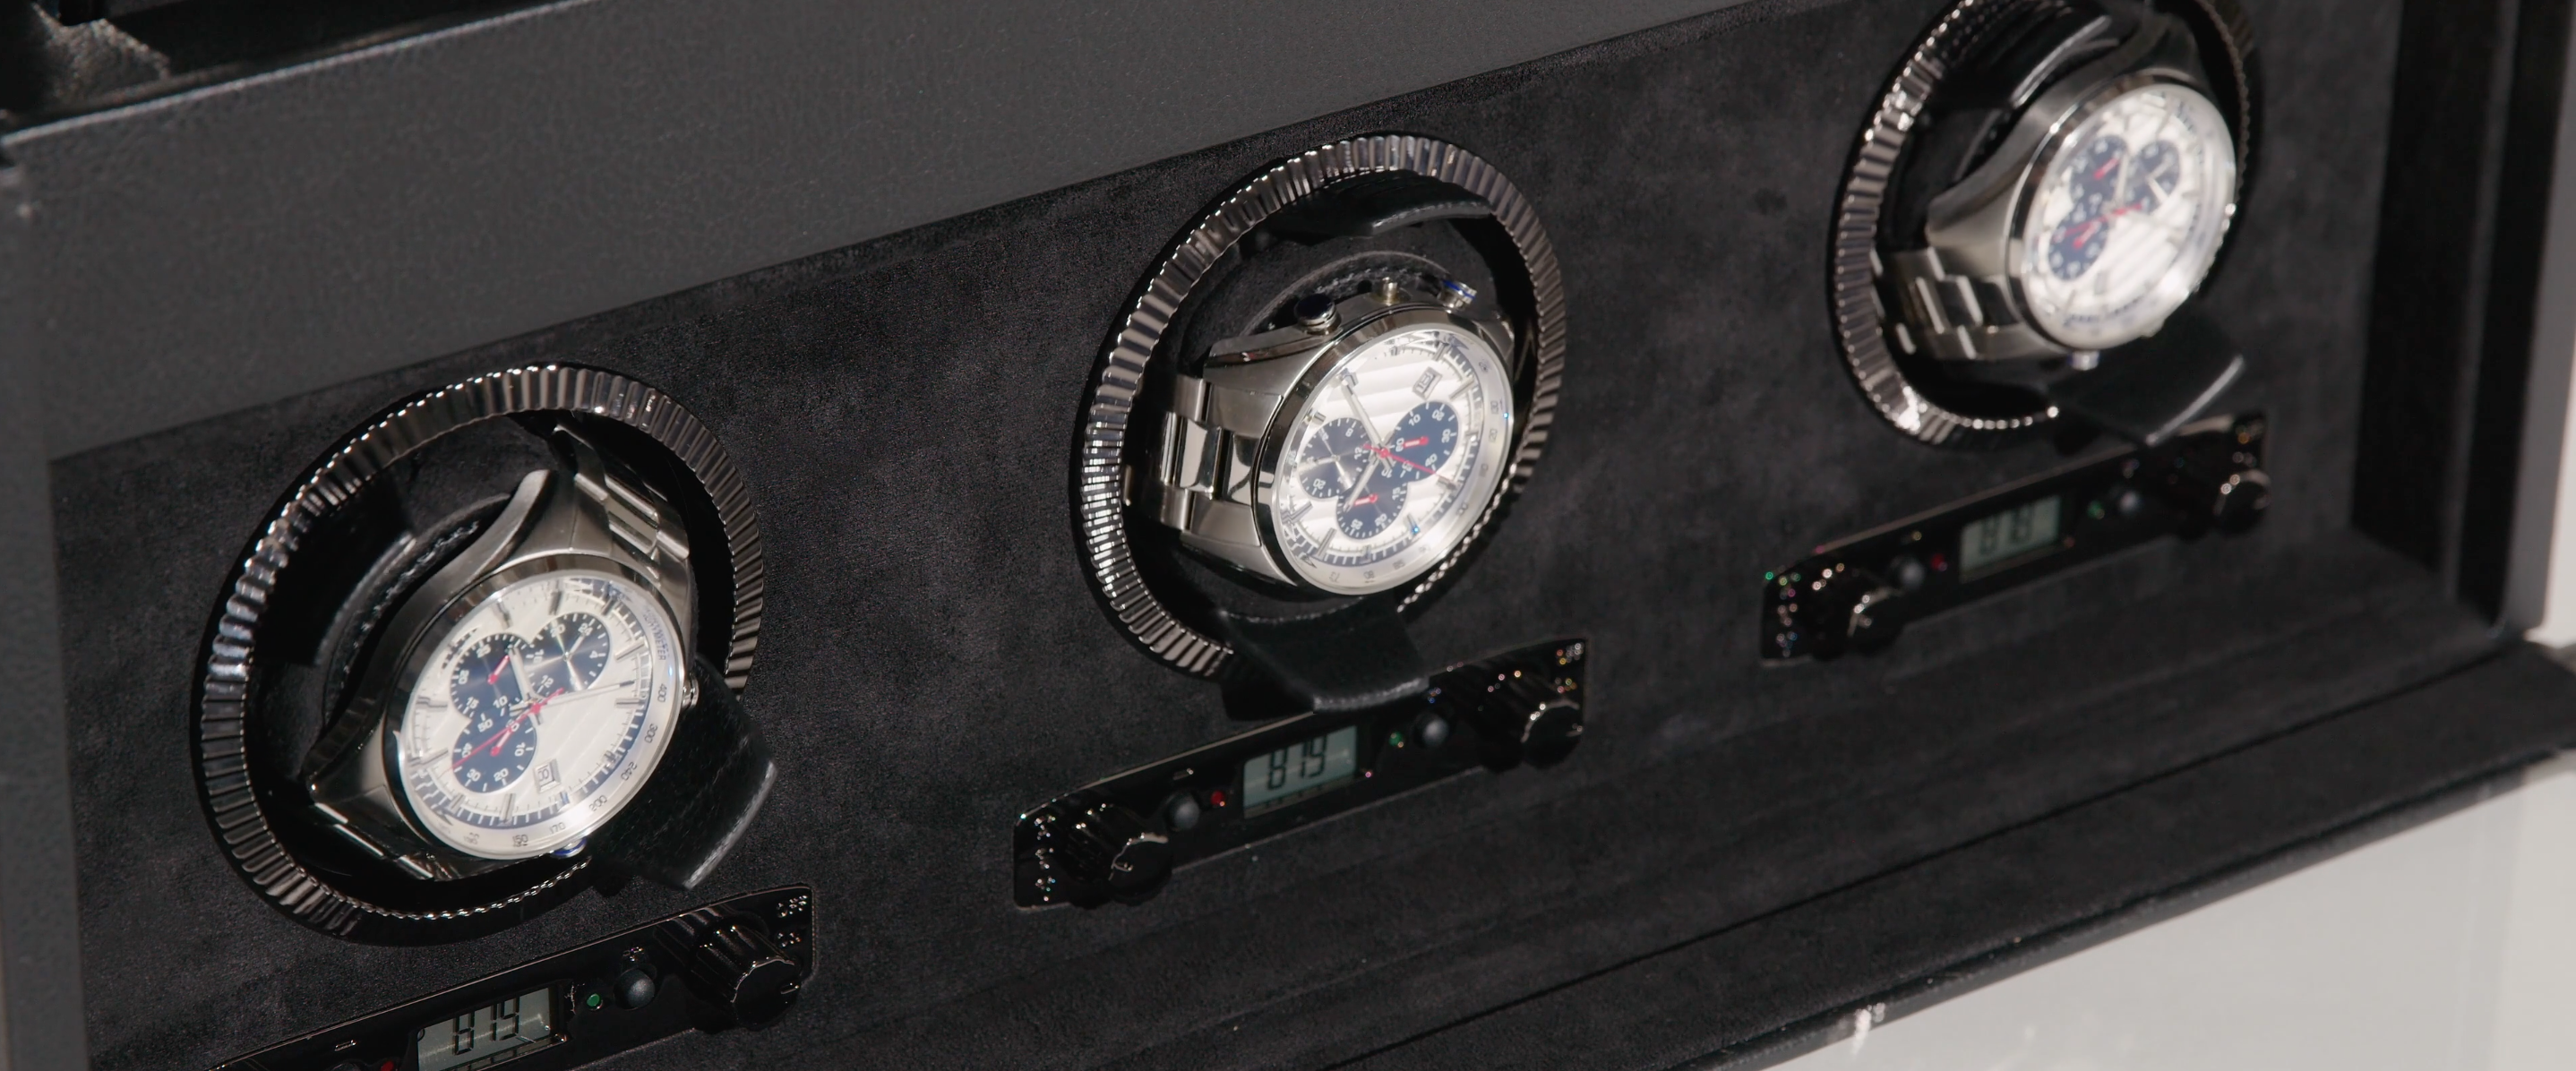 Close-up picture of 3 watches on a WOLF1834 watch winder available at Deutsch Fine Jewelry in Houston, Texas